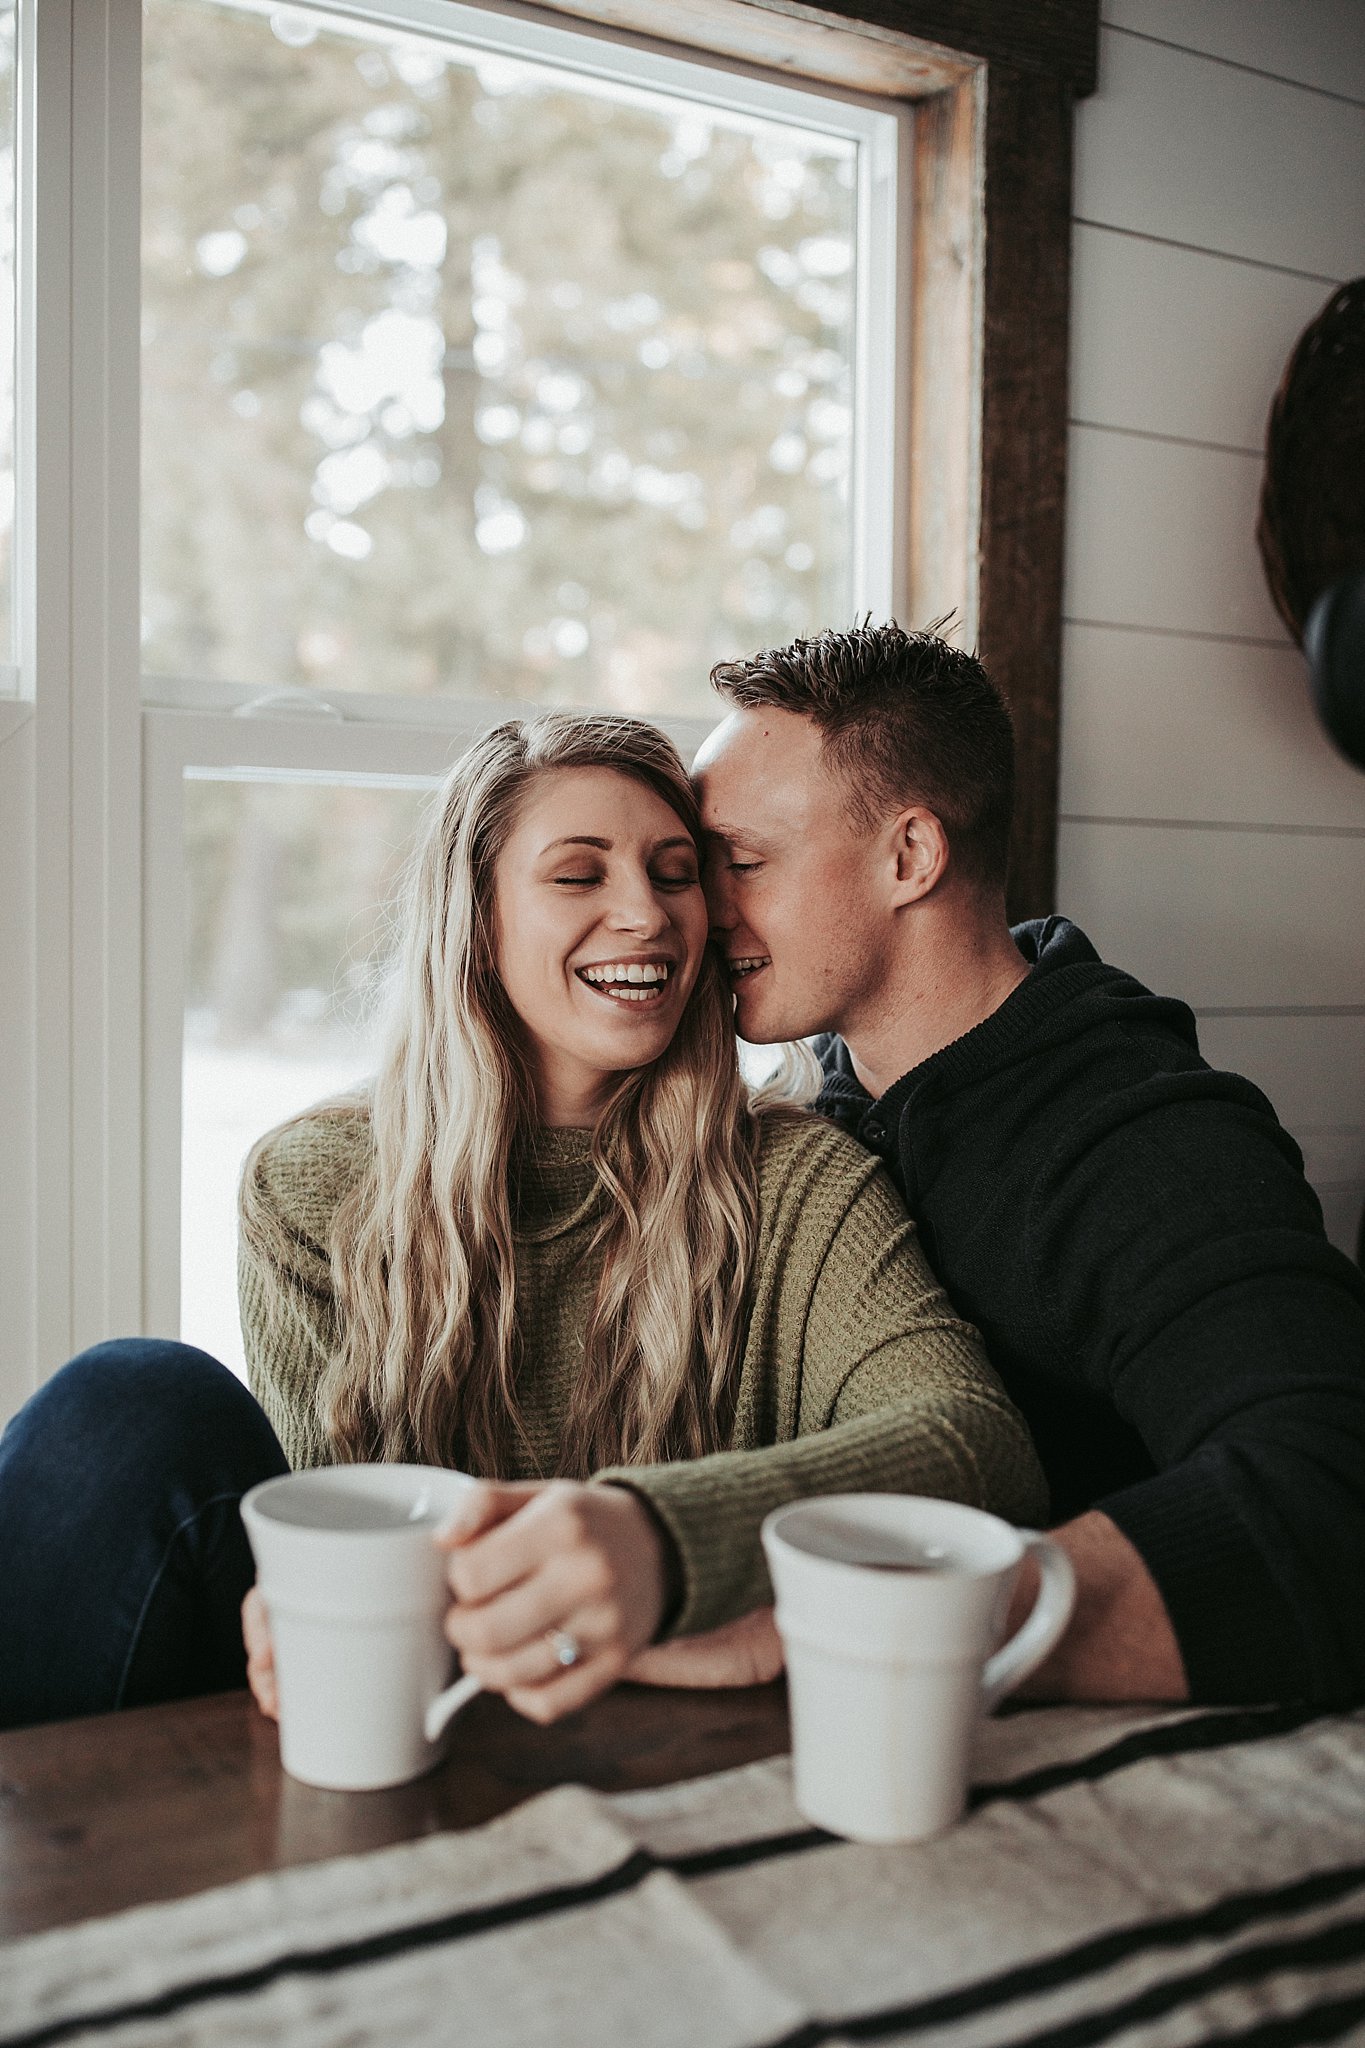 Romantic and Cozy couple enjoying a cup of coffee